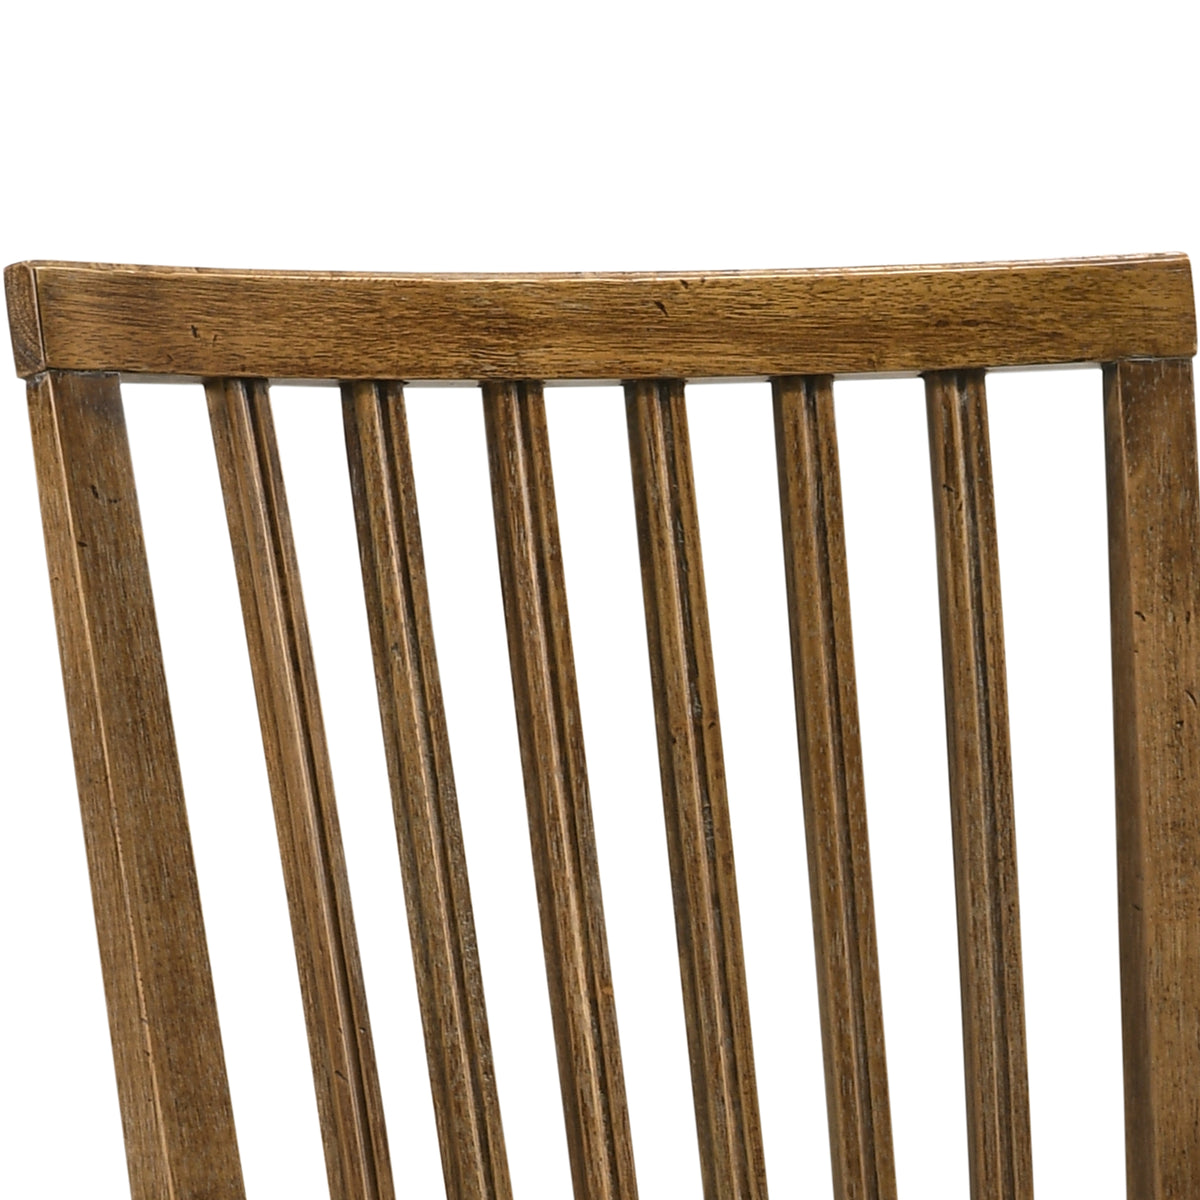 Wooden Dining Side Chairs with Tapered Legs, Beige and Brown - BM204544